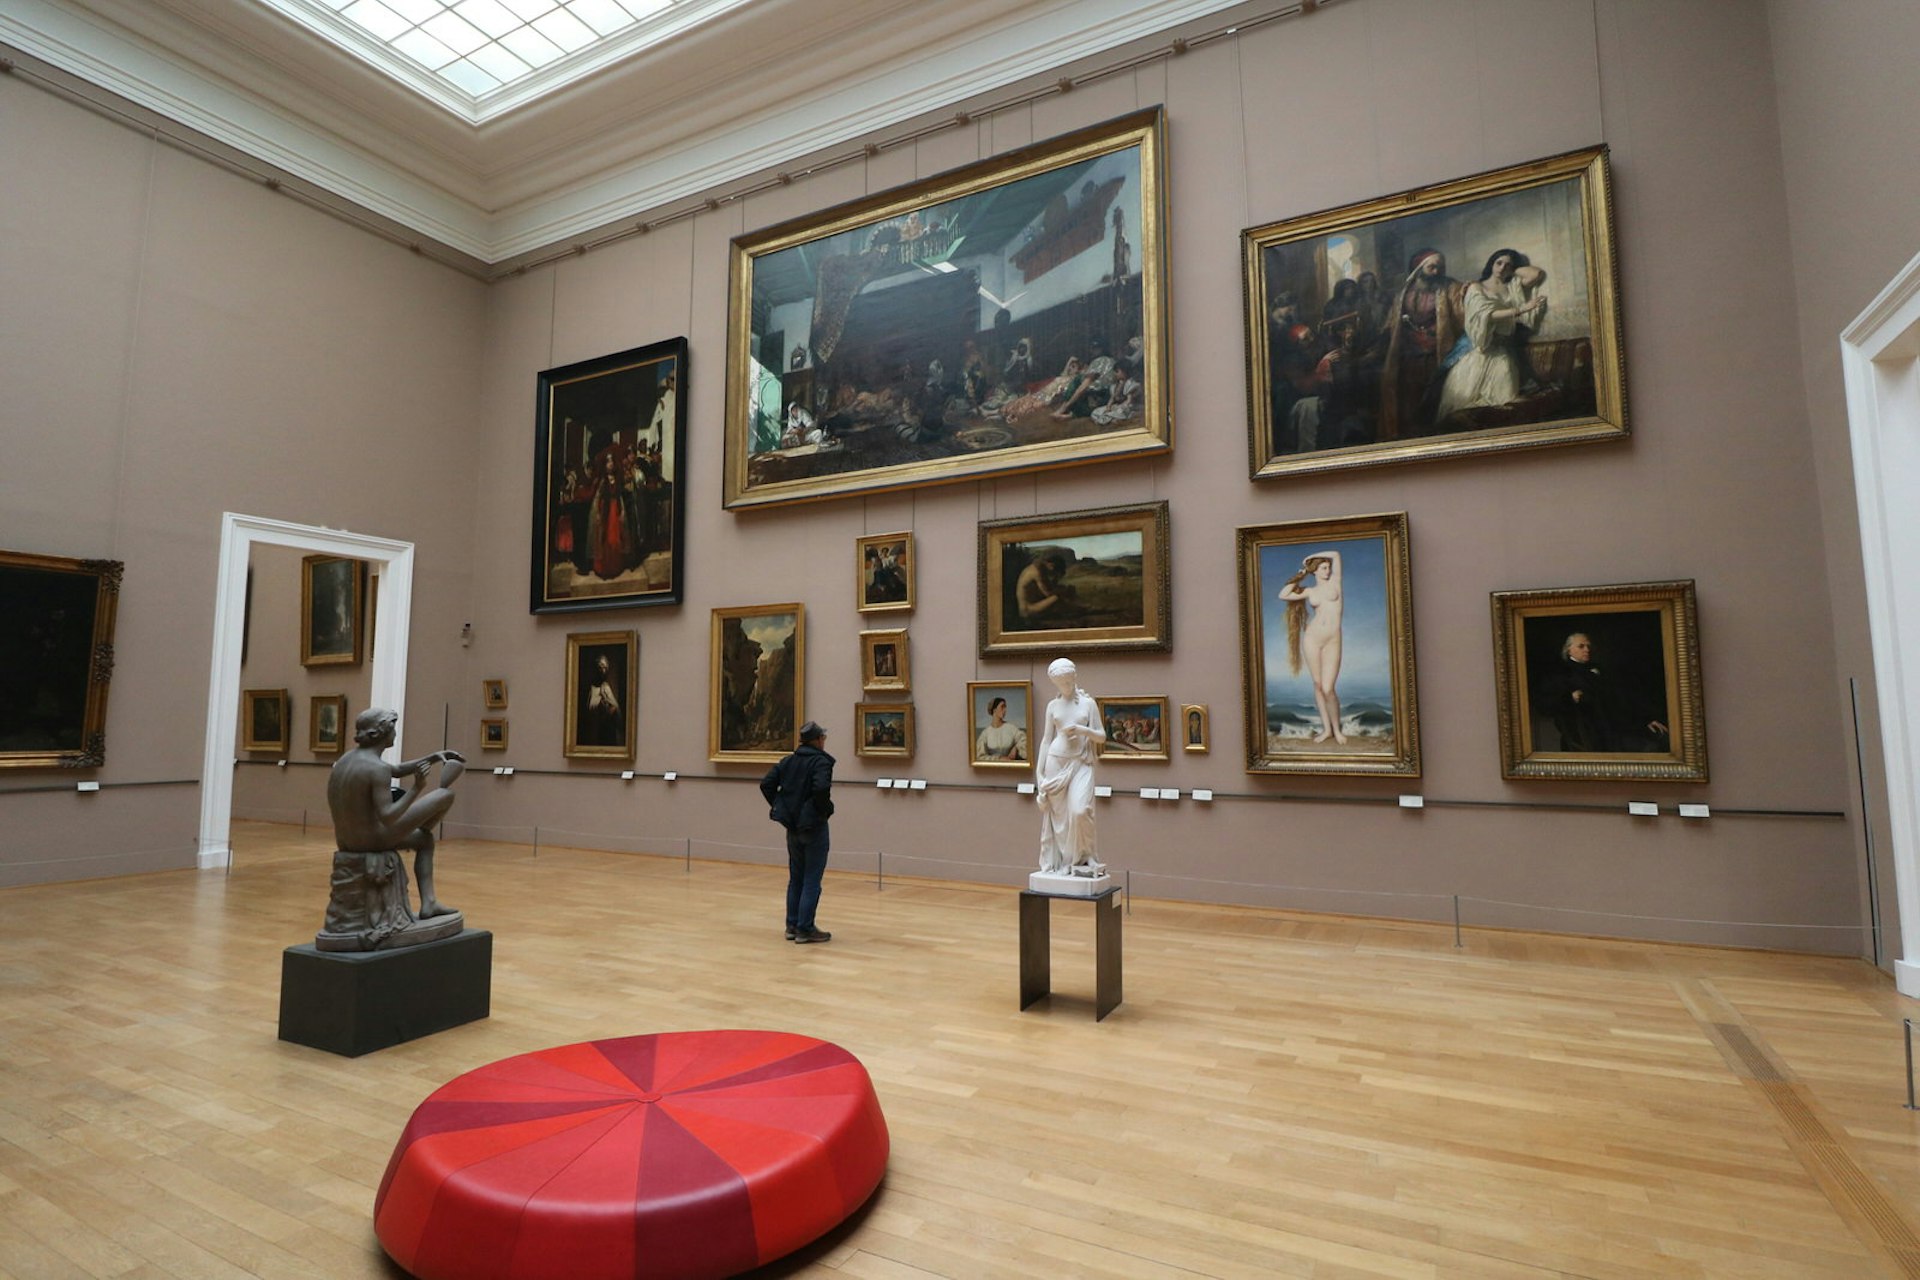 A spectator, flanked by two large sculptures of people, admires the large paintings covered the wall in the Palais des Beaux Arts, Lille